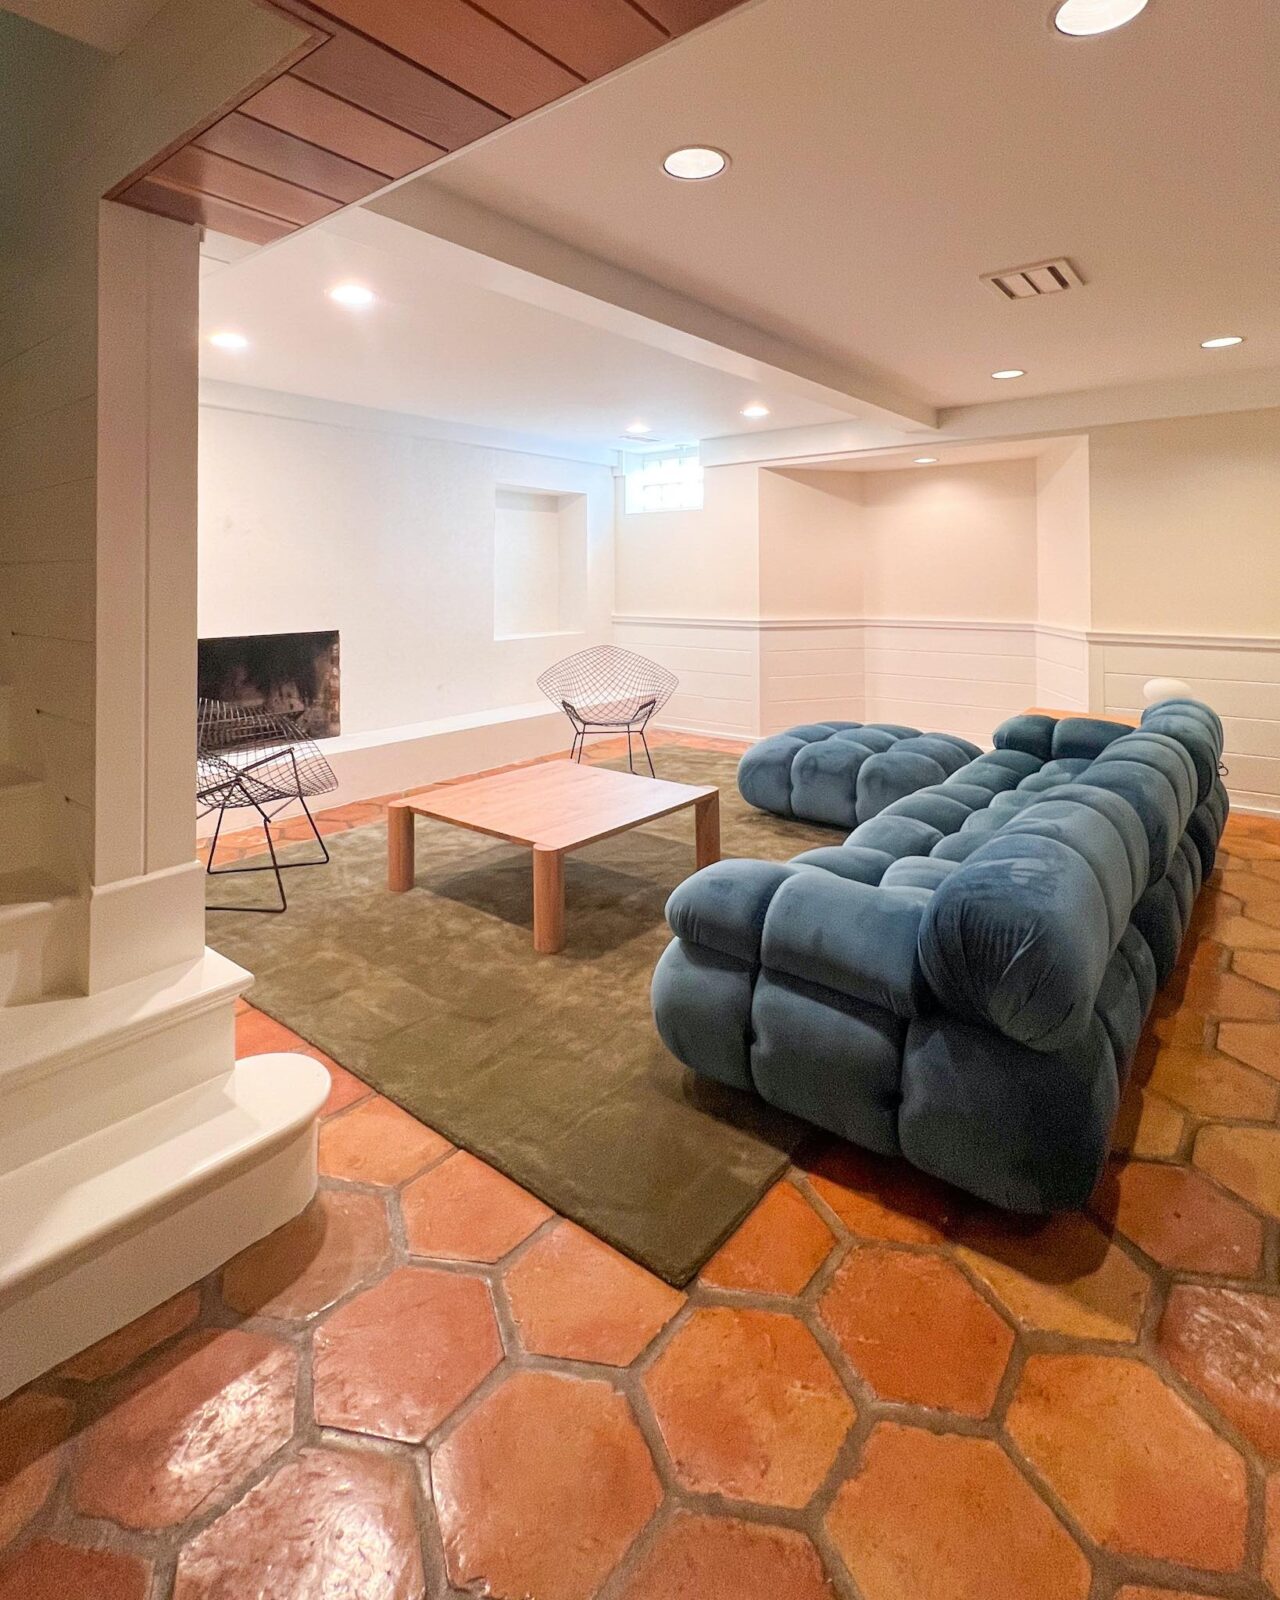 A basement family room with white and cream walls, plush green rugs, a blue modular sofa, a white oak coffee table, and vintage Bertoia diamond chairs